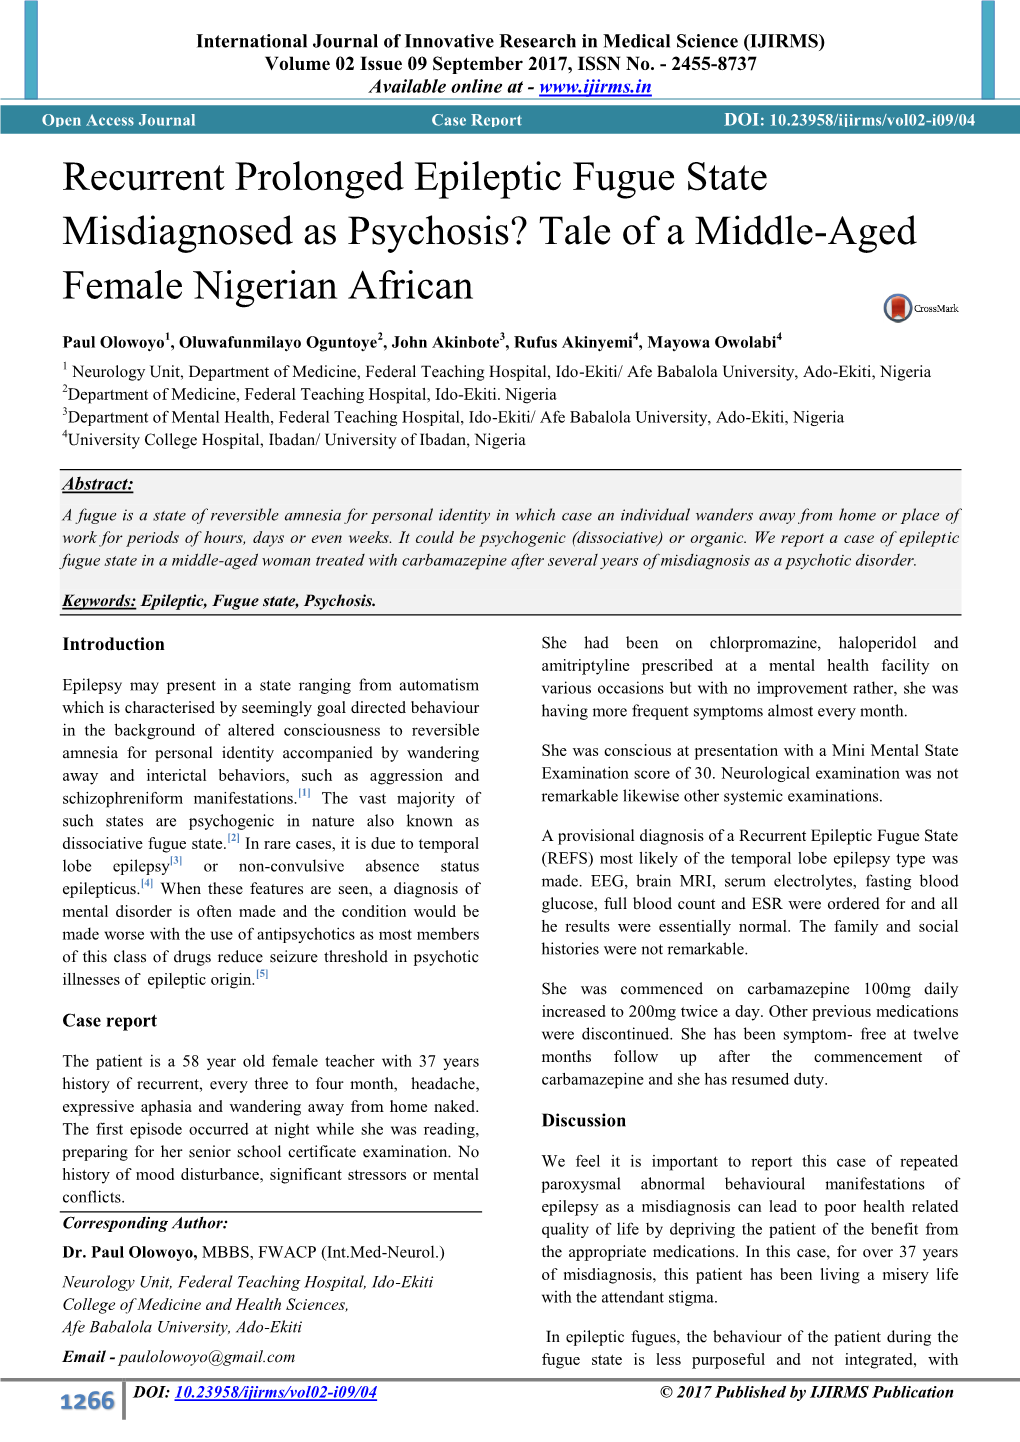 Recurrent Prolonged Epileptic Fugue State Misdiagnosed As Psychosis? Tale of a Middle-Aged Female Nigerian African